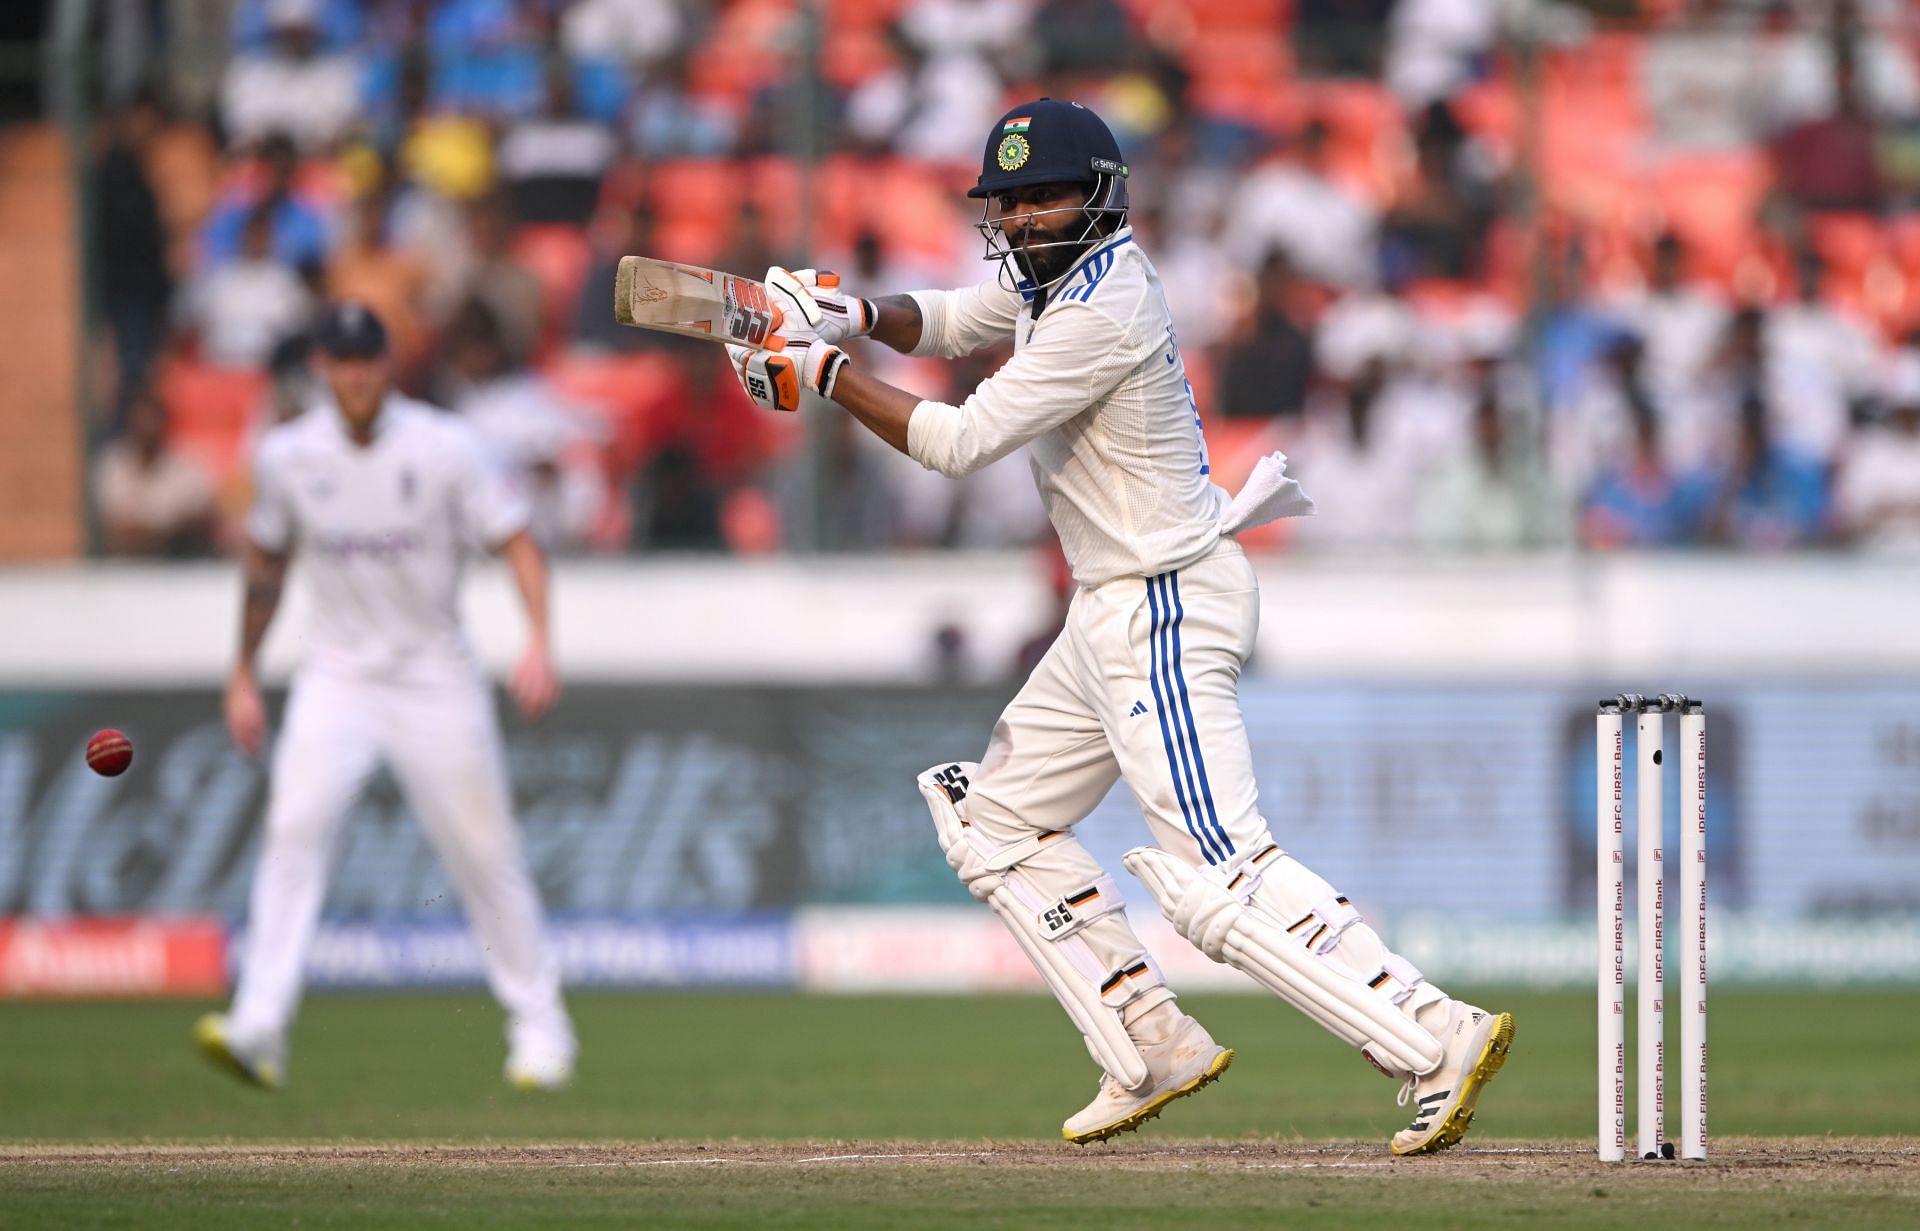 Ravindra Jadeja has struck seven fours and two sixes during his unbeaten 81-run knock. [P/C: Getty]